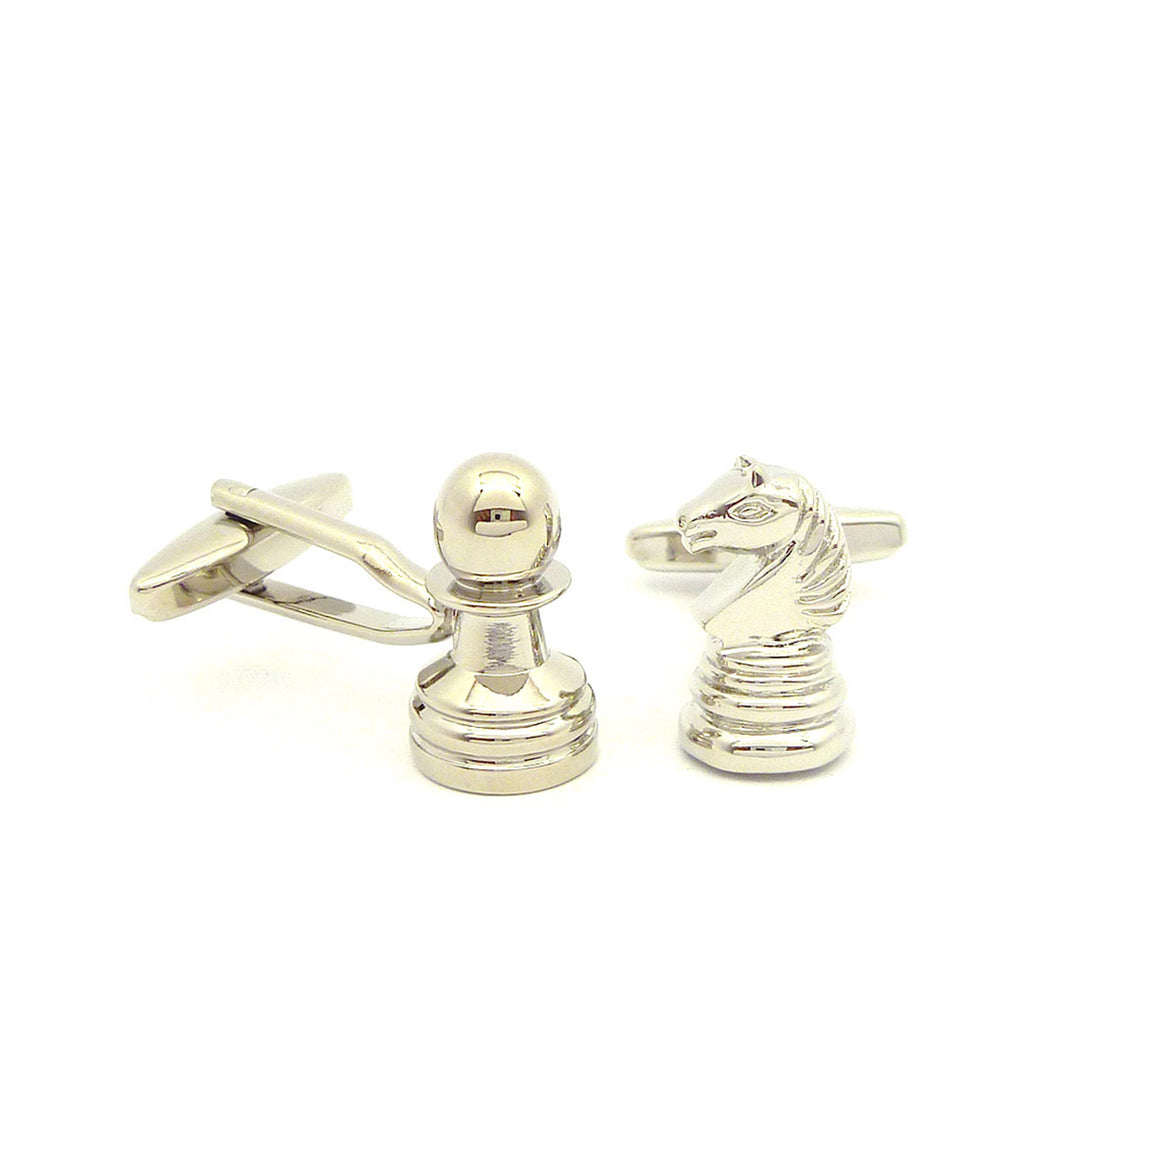 Wild Links - Silver Chess Pawn and Knight Cufflinks